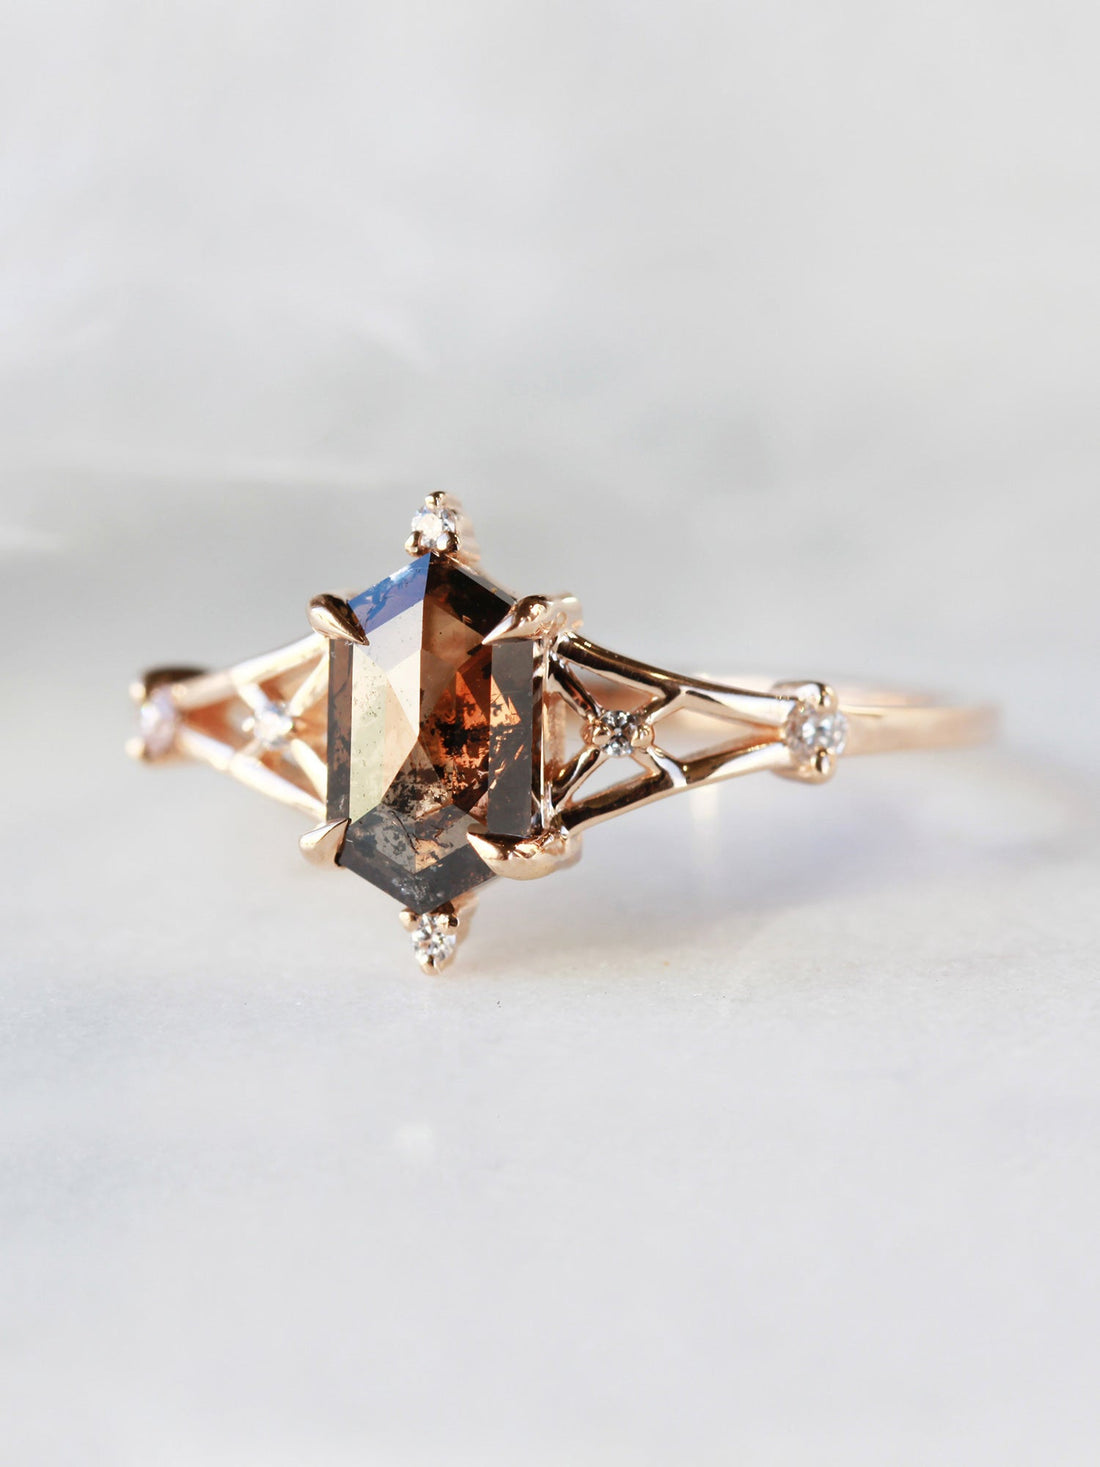 Hexagon salt and pepper diamond engagement ring in 14k rose gold with smaller and round diamonds inspired by the art deco style and minimalism.